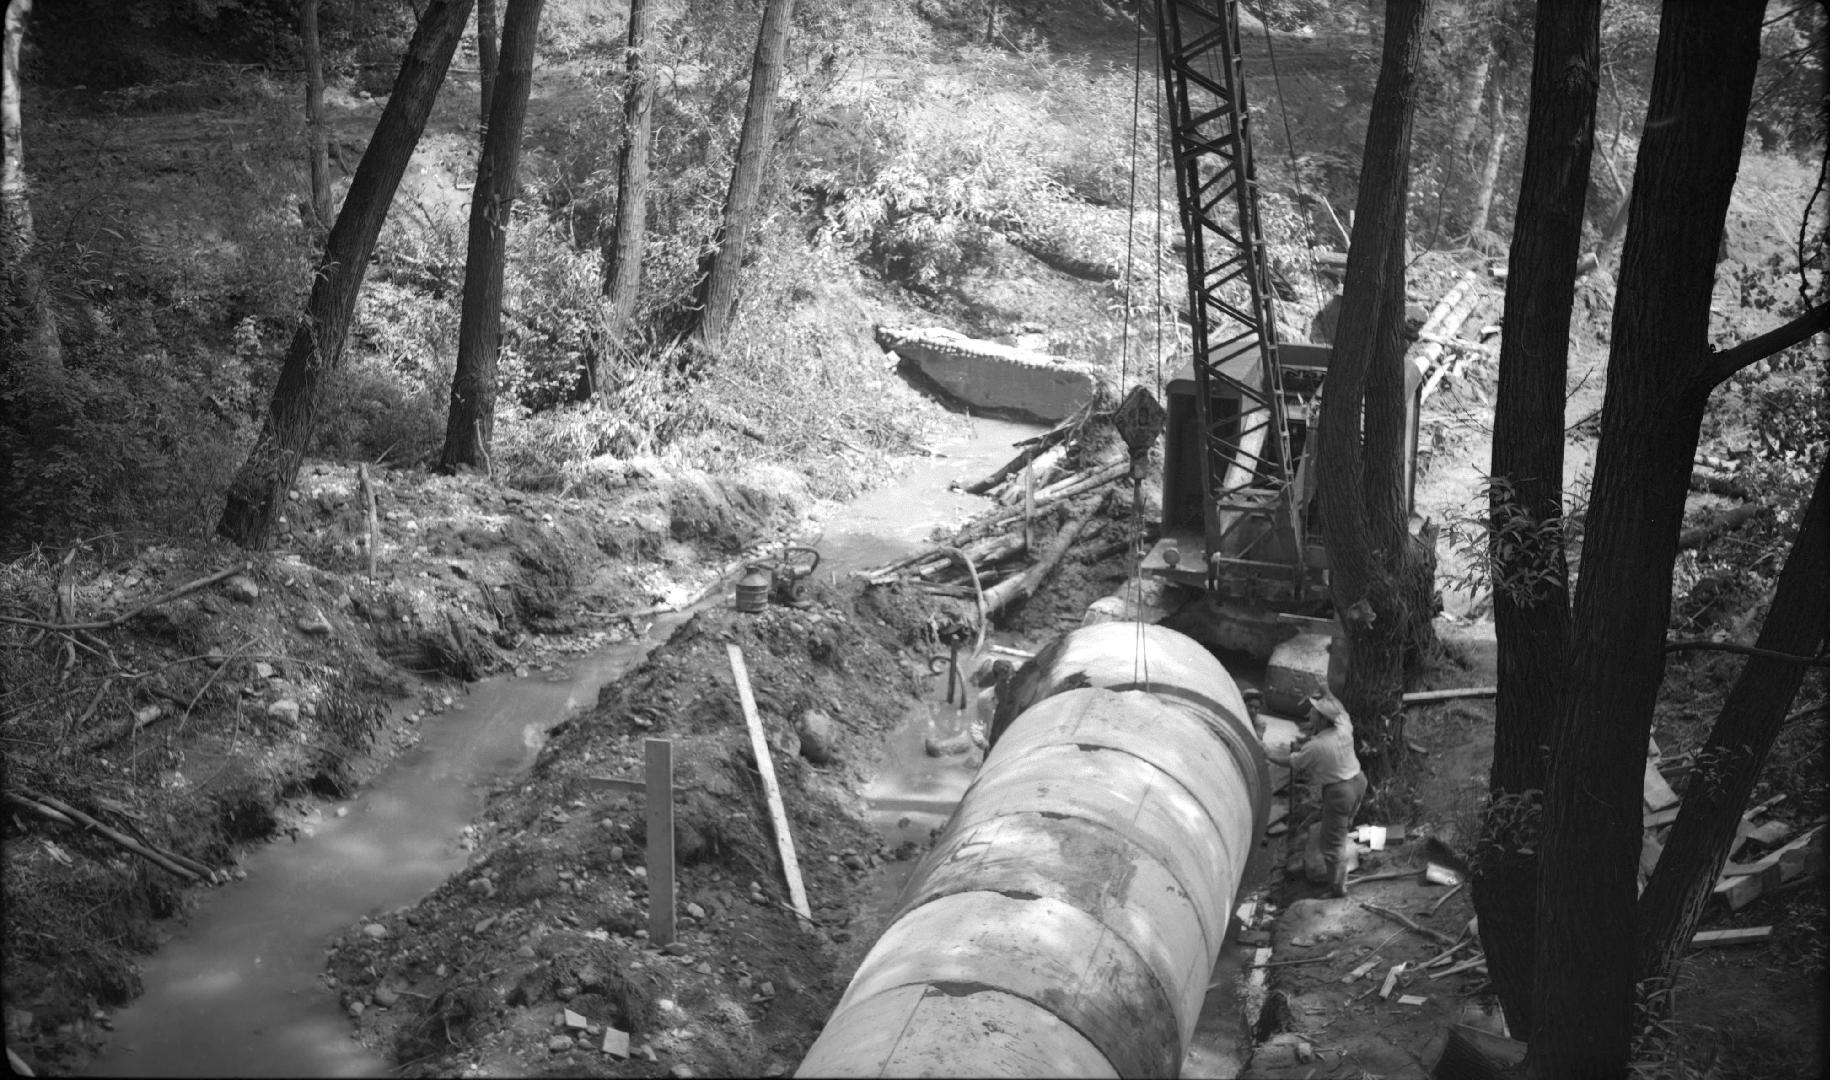 Image shows a few pipes on the ground and some construction equipment.